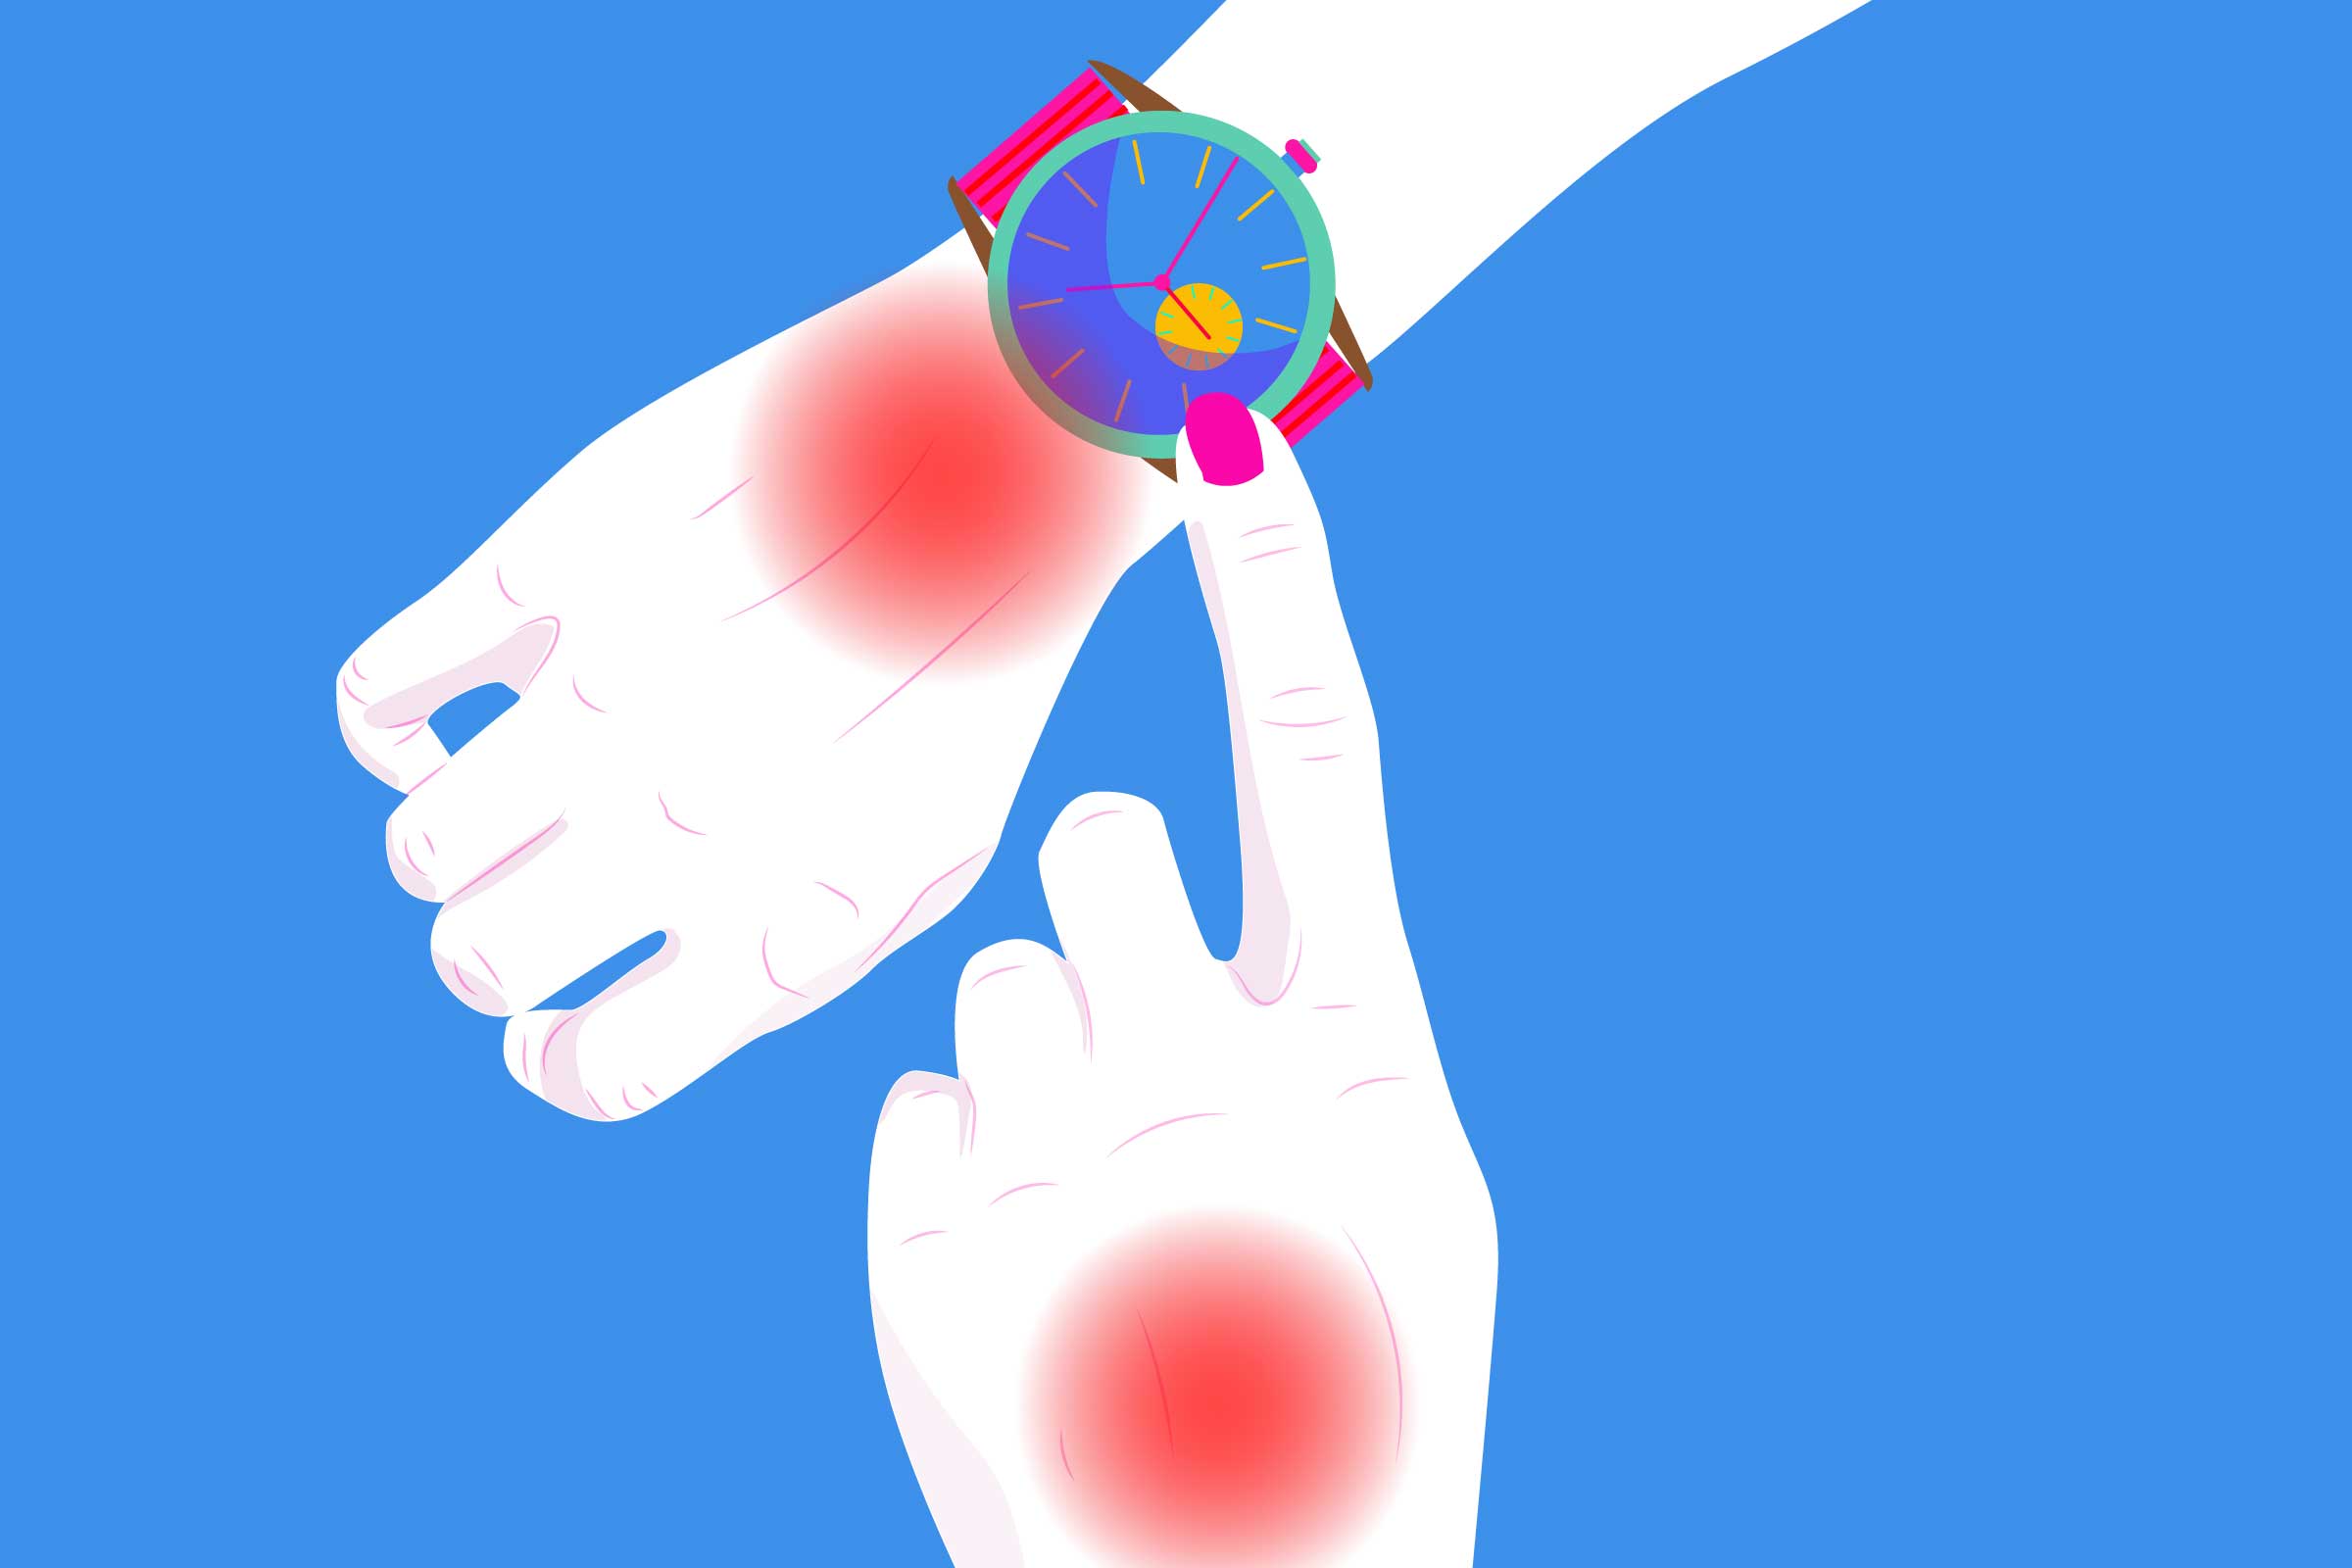 Cartoon shows a person pointing to her watch. Her wrists have red spots indicating joint pain